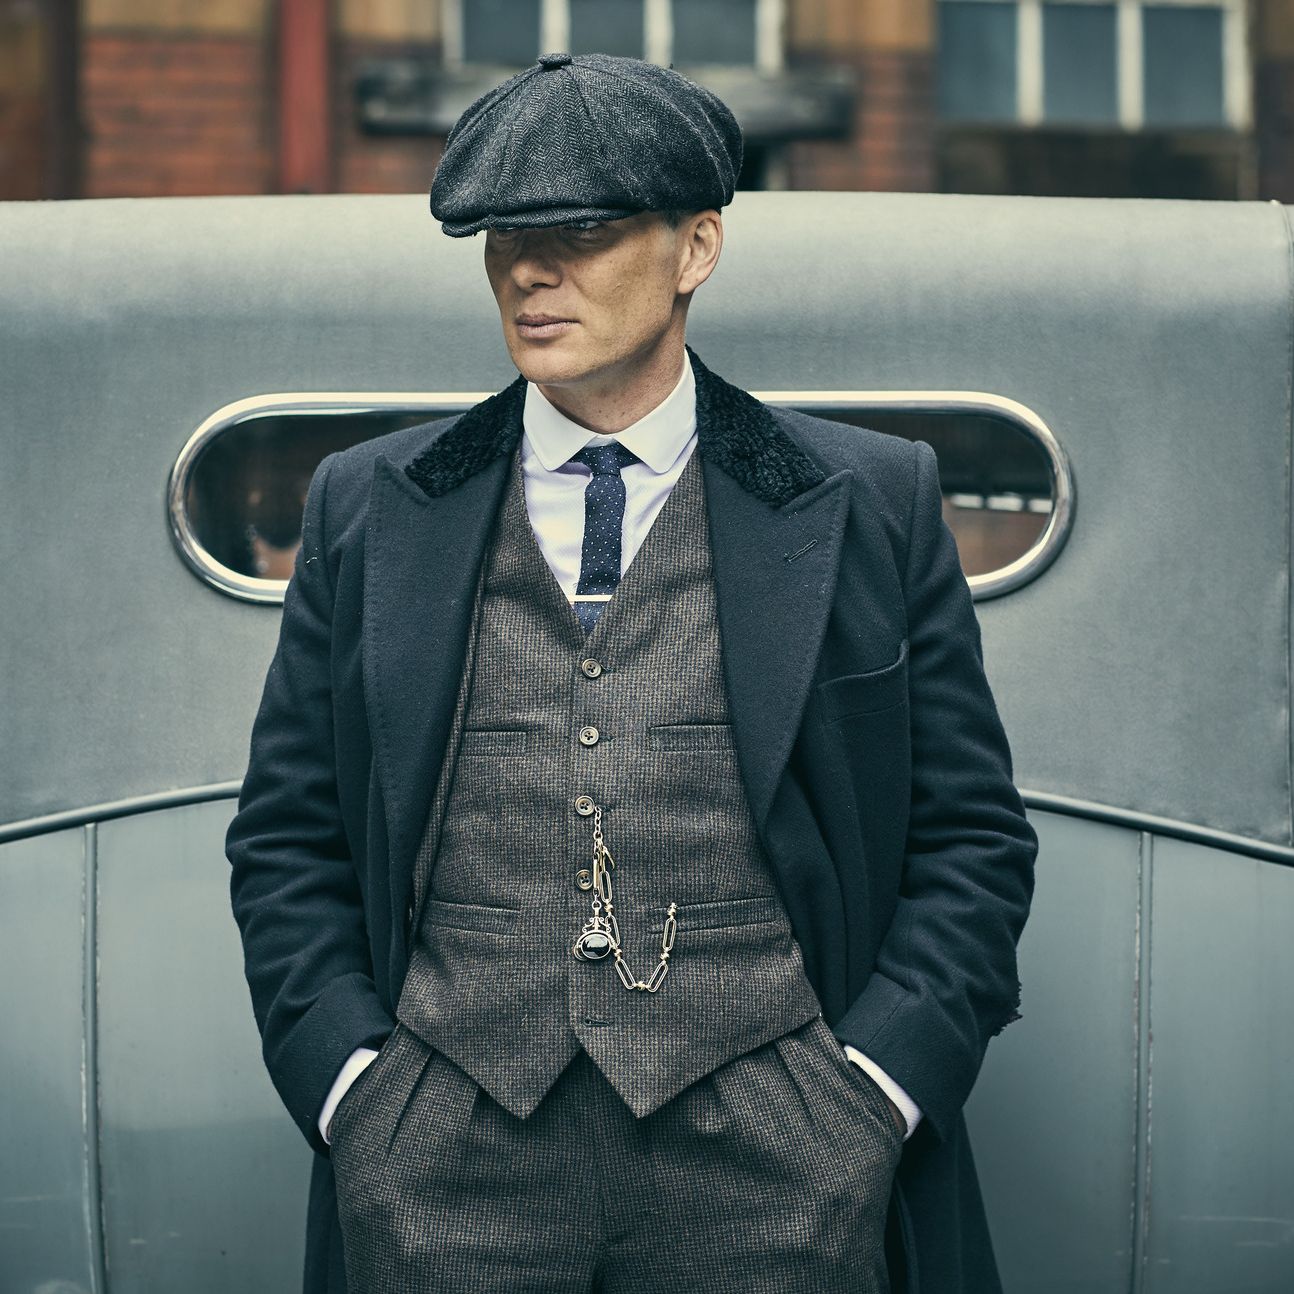 Peaky Blinders Creator Steven Knight Had A Very Personal Goal For